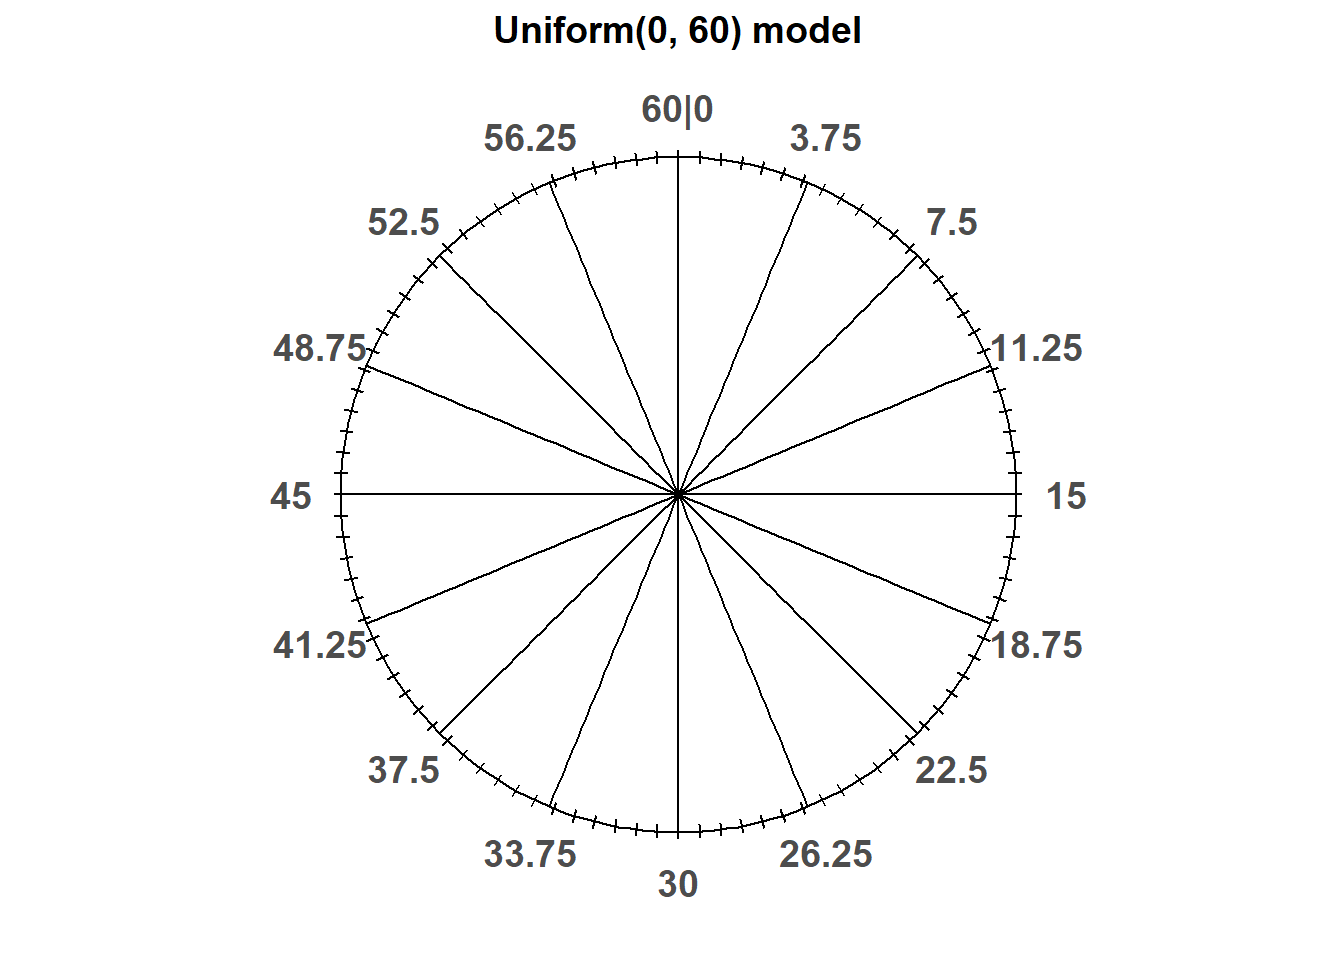 A continuous [0, 60] spinner. The same spinner is displayed on both sides, with different features highlighted on the left and right. Only selected rounded values are displayed, but in the idealized model the spinner is infinitely precise so that any real number between 0 and 60 is a possible outcome.